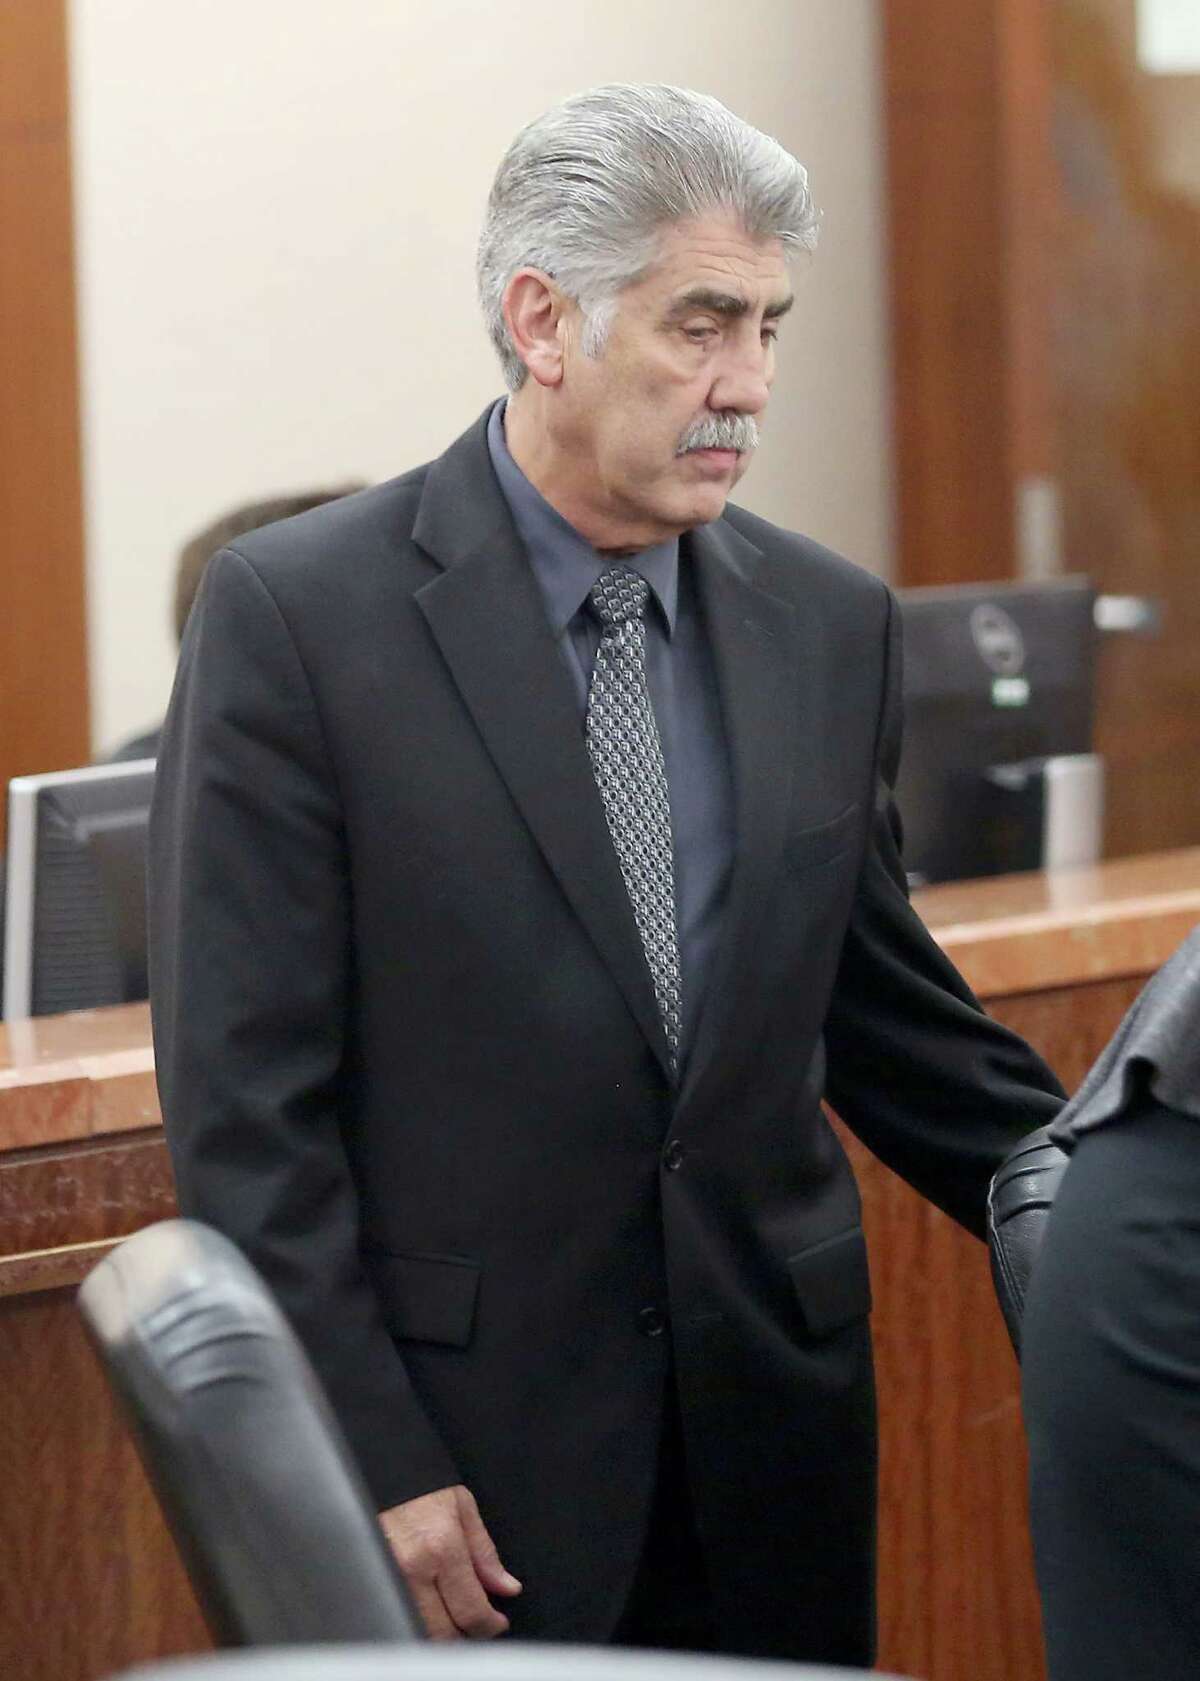 Precinct 6 Constable, Victor Trevino, accused of taking money for personal use from a charity he founded; plead guilty in front of Judge Susan Brown and his attorney Chip Lewis in the 185th court of the Harris County Courthouse on November 3, 2014 in Houston, TX. Trevino sentence hearing is set for November 17, 2014 at 1 pm.